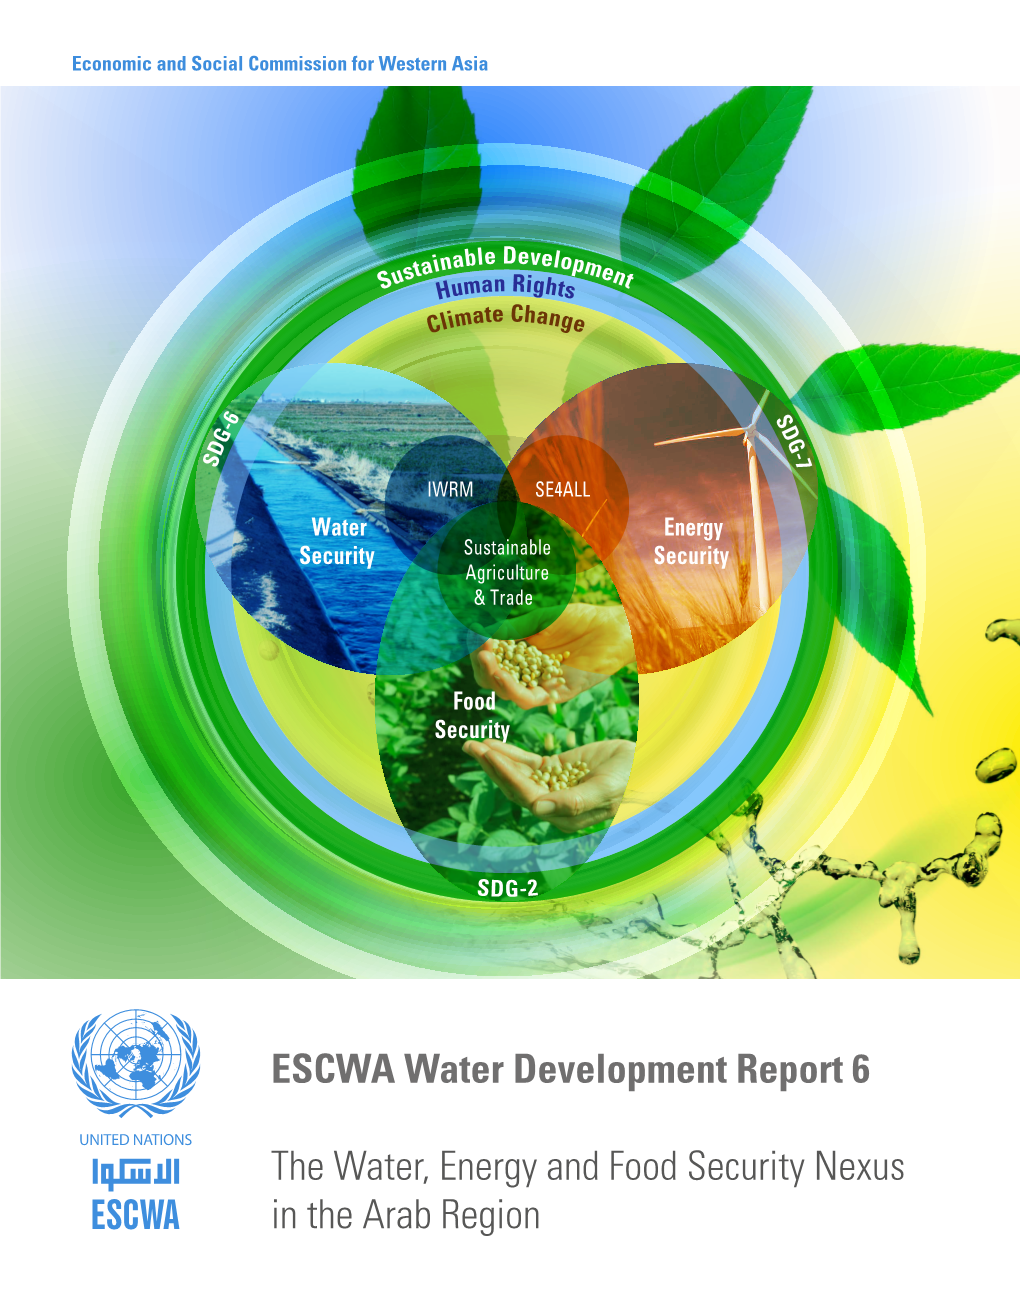 ESCWA Water Development Report 6 the Water, Energy and Food Security Nexus in the Arab Region